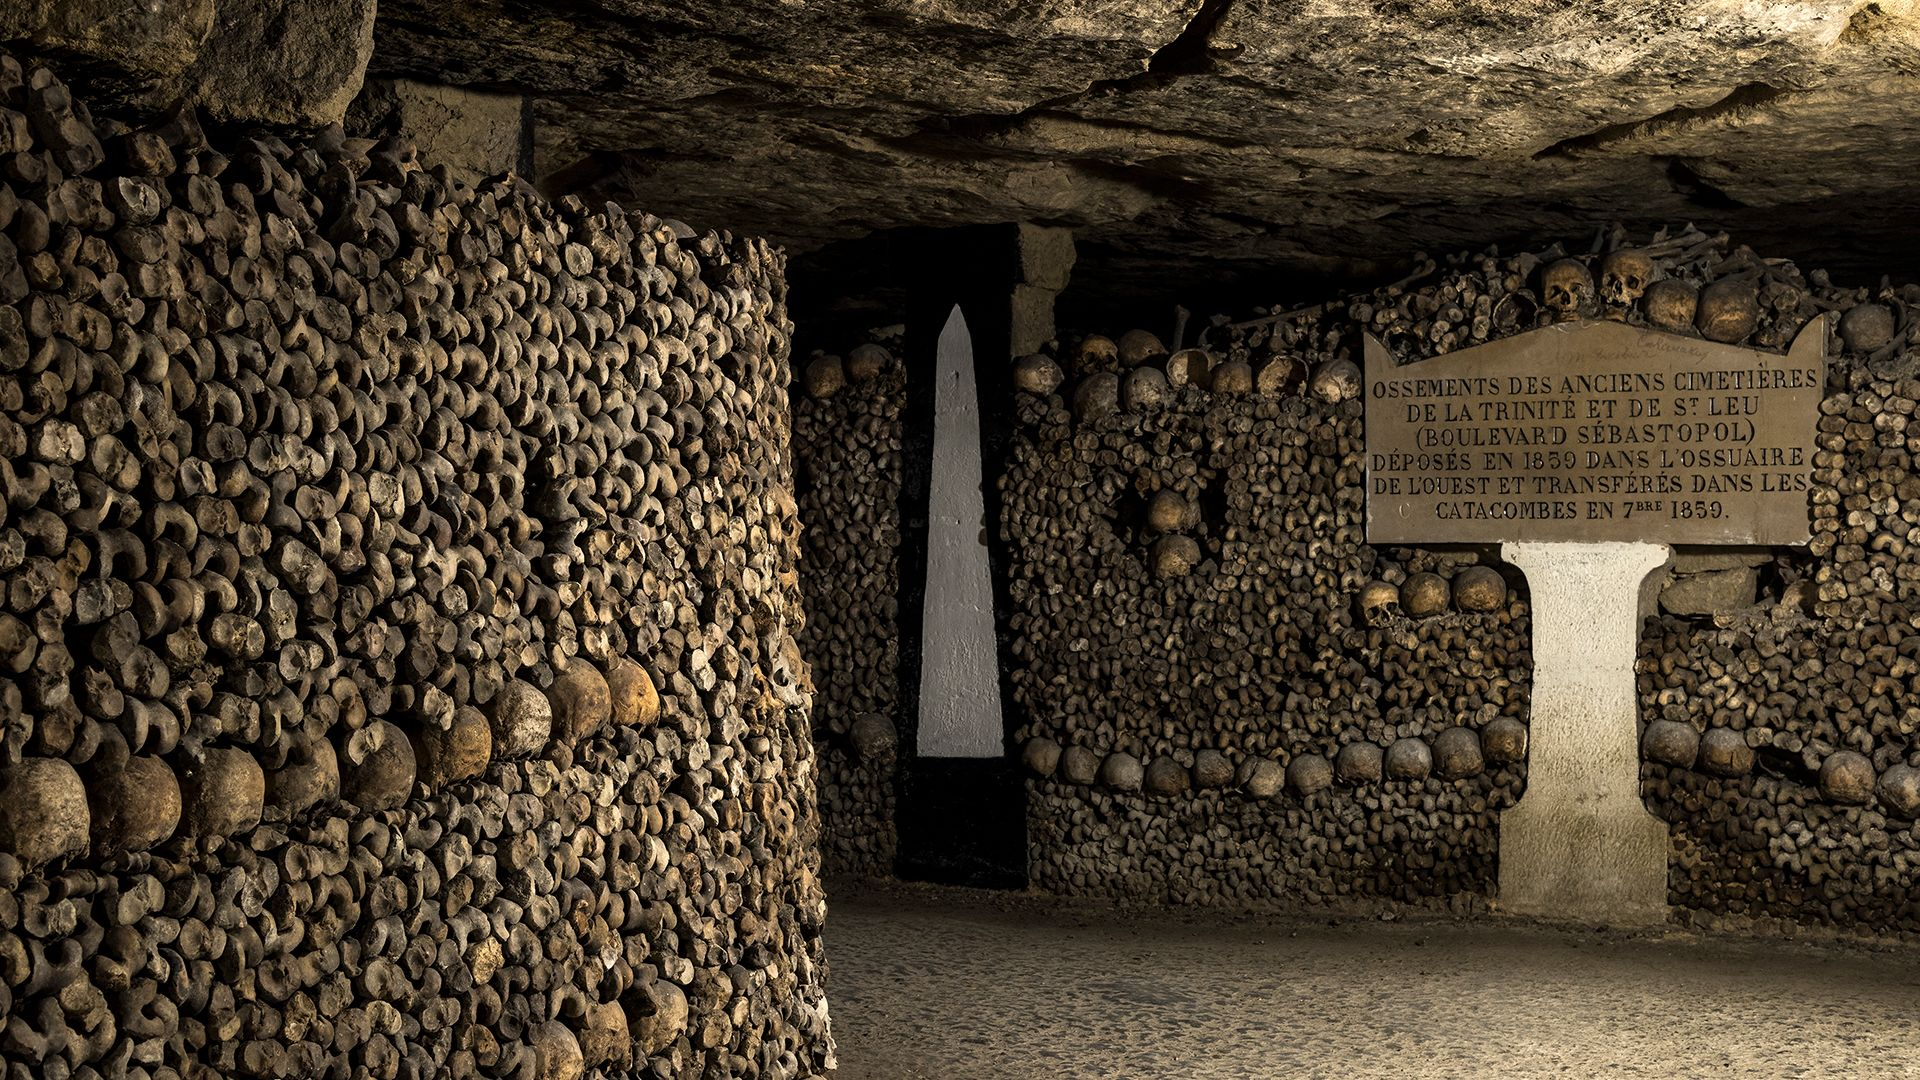 What are the catacombs and Where are the Catacombs located?